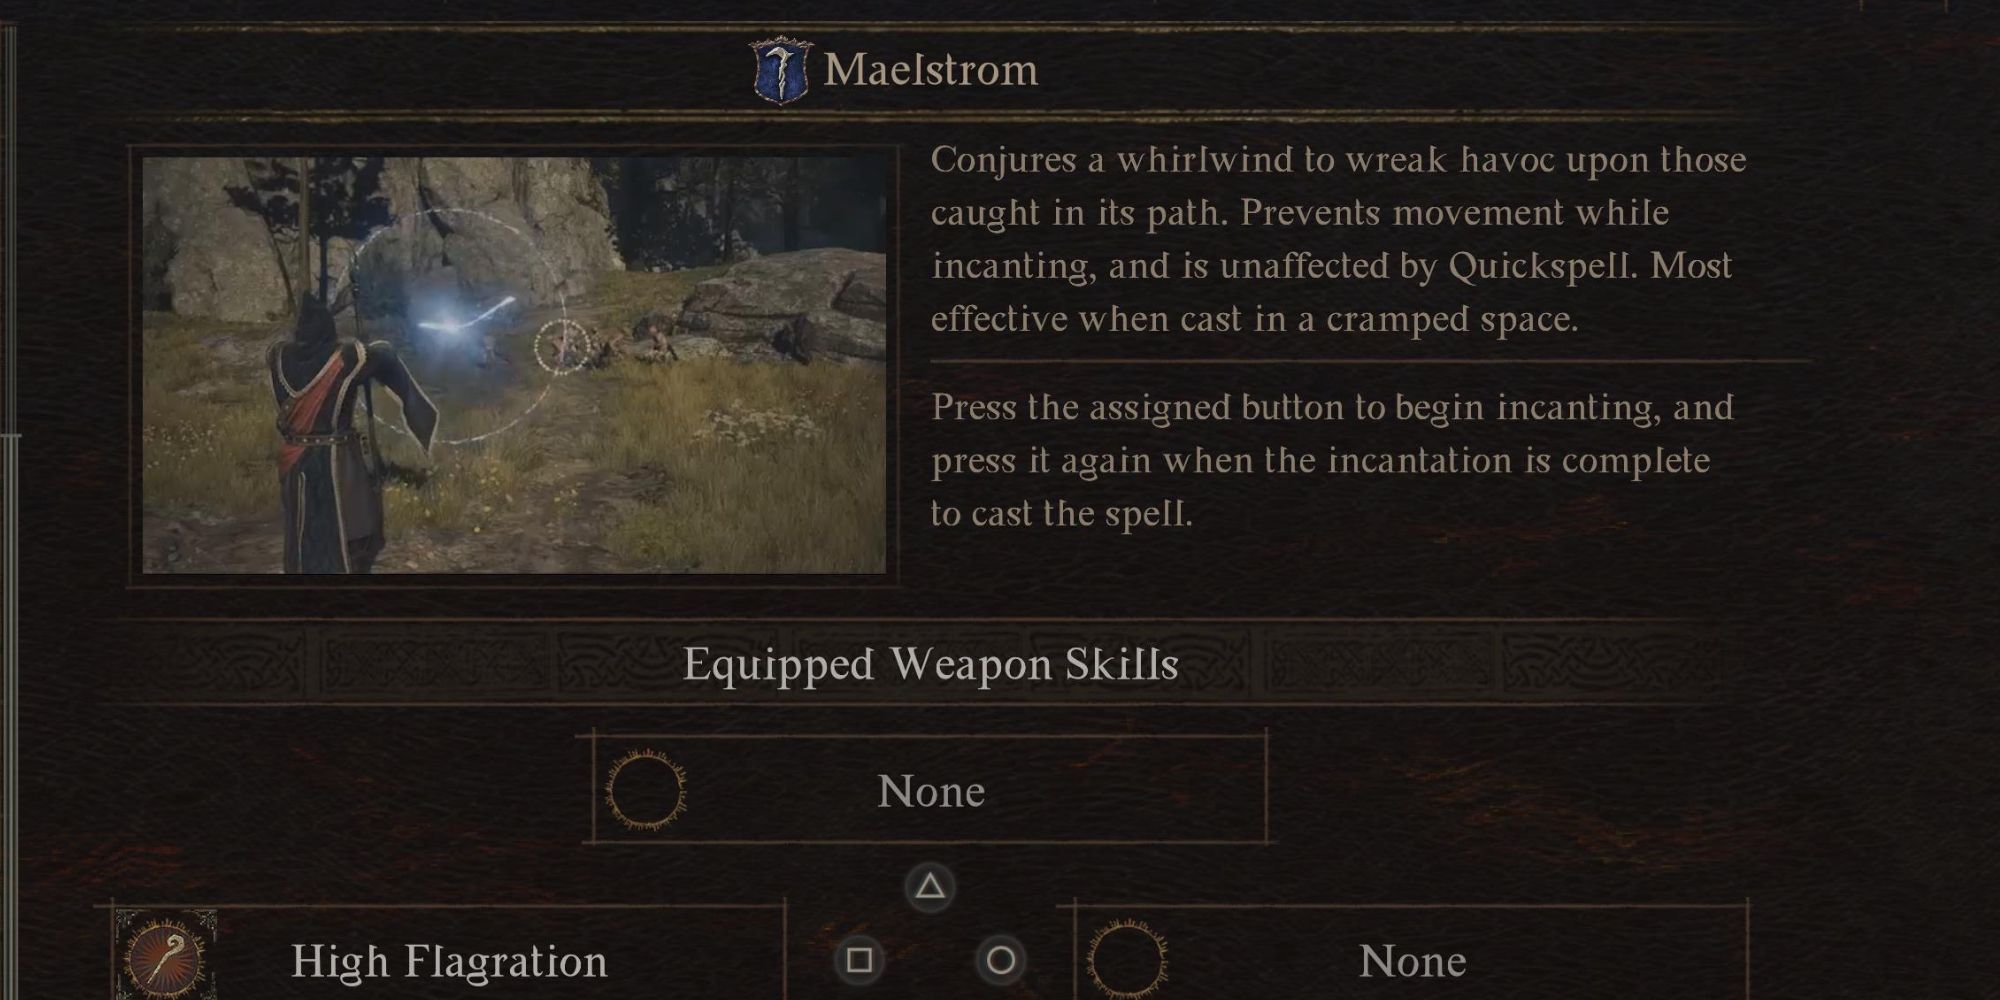 The Maelstrom Weapon skill in Dragon’s Dogma 2